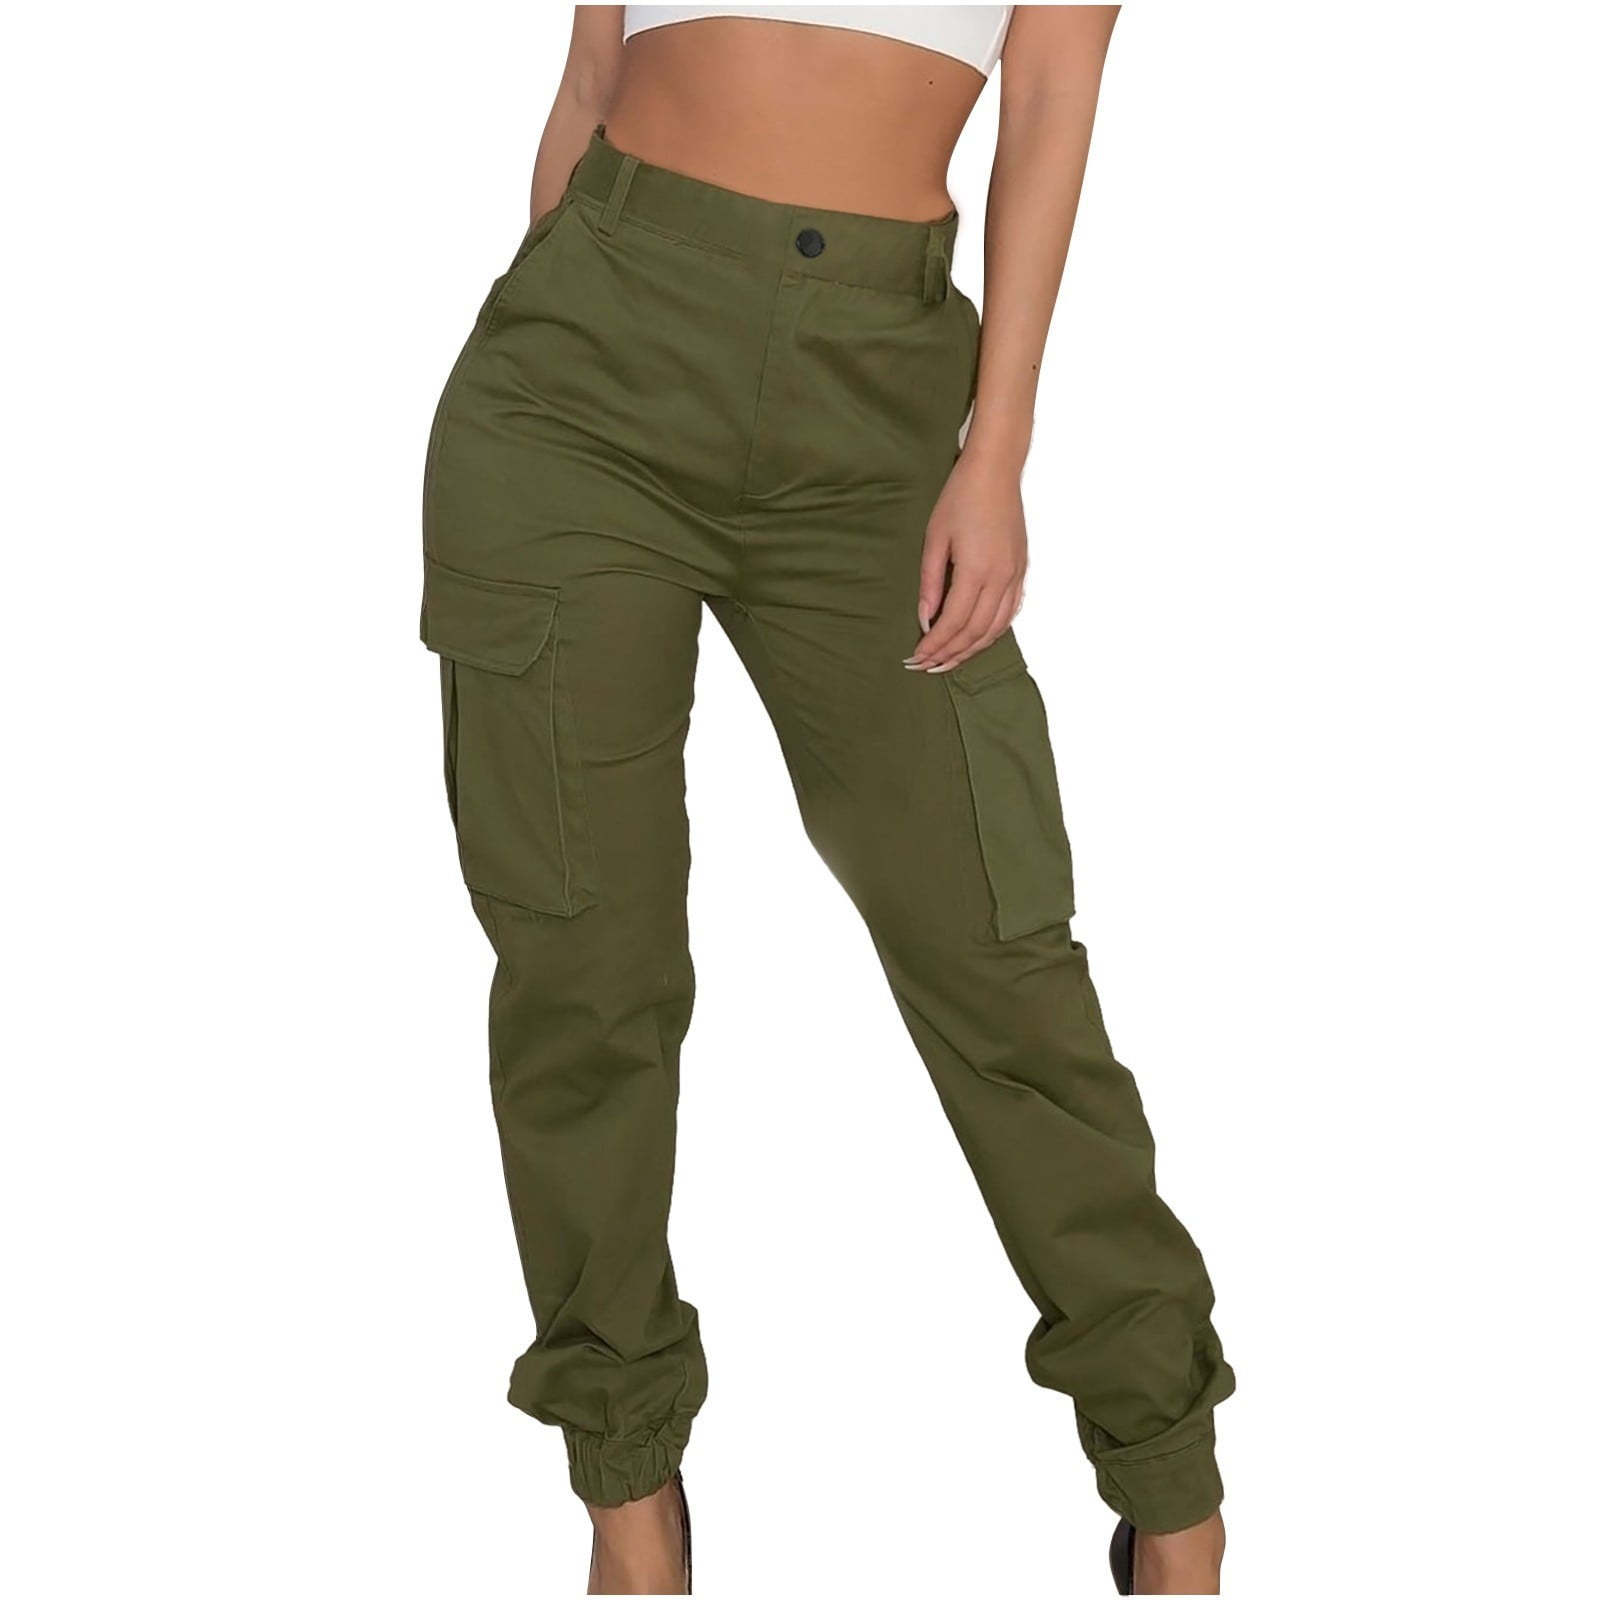 YYDGH Women's Hiking Cargo Jogger Pants Slim Casual Outdoor